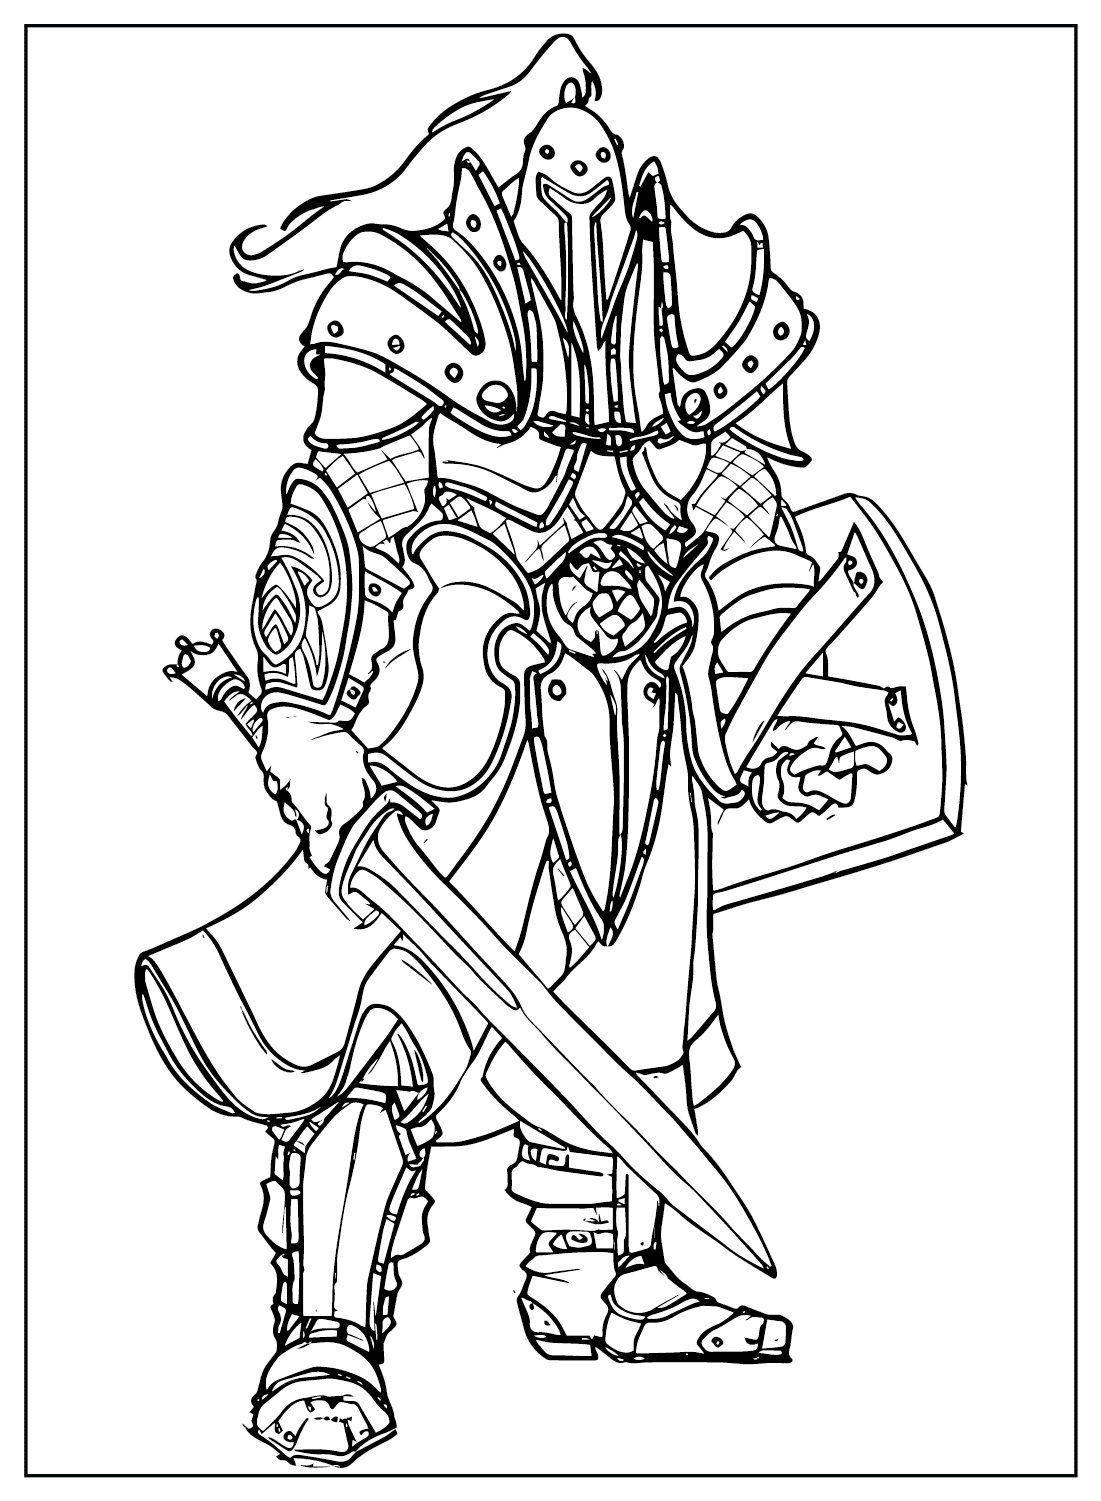 Coloring Page Dota 2 from Dota 2